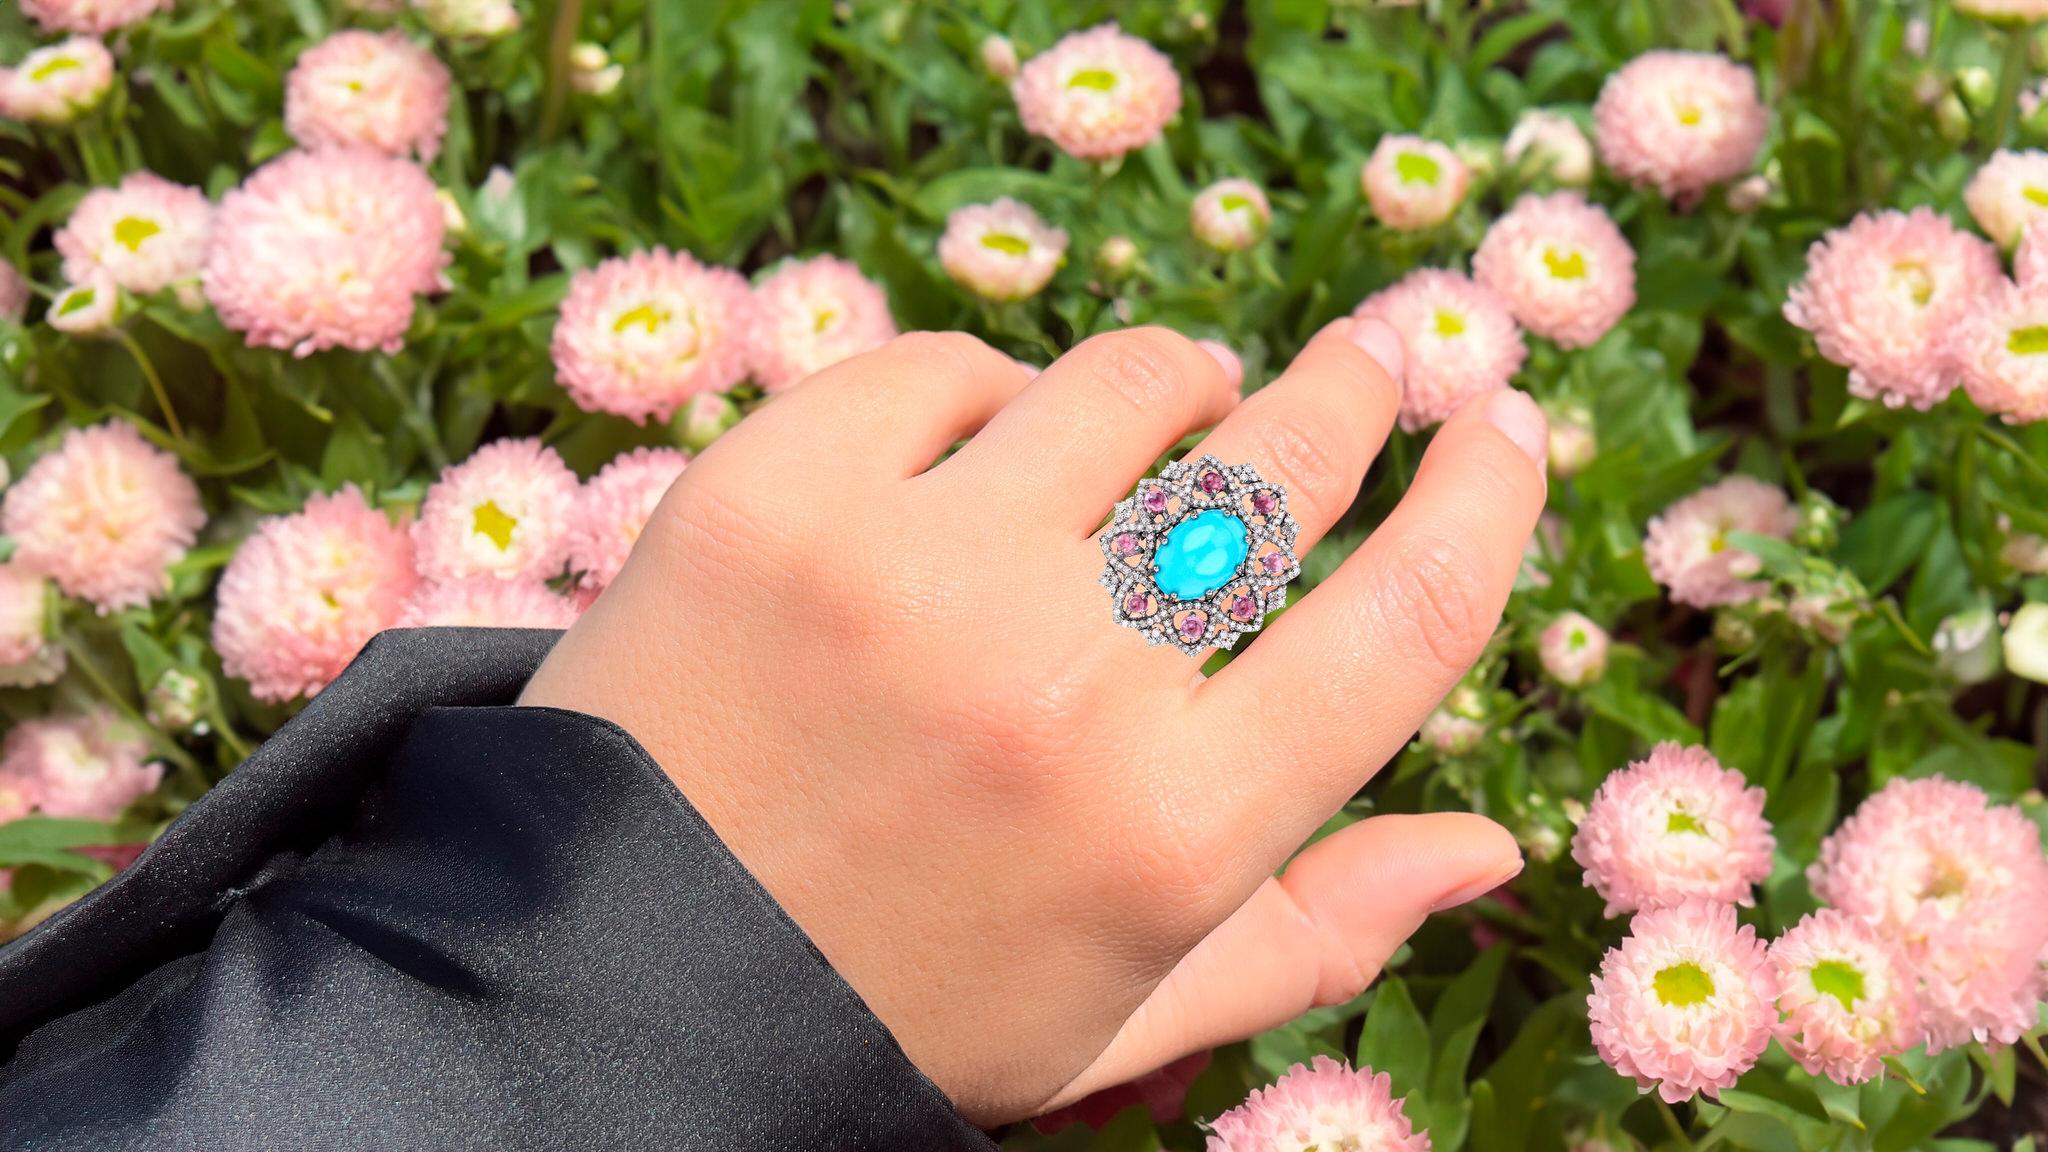 Cabochon Turquoise Floral Cocktail Ring Pink Tourmalines Diamonds 7.5 Carats For Sale